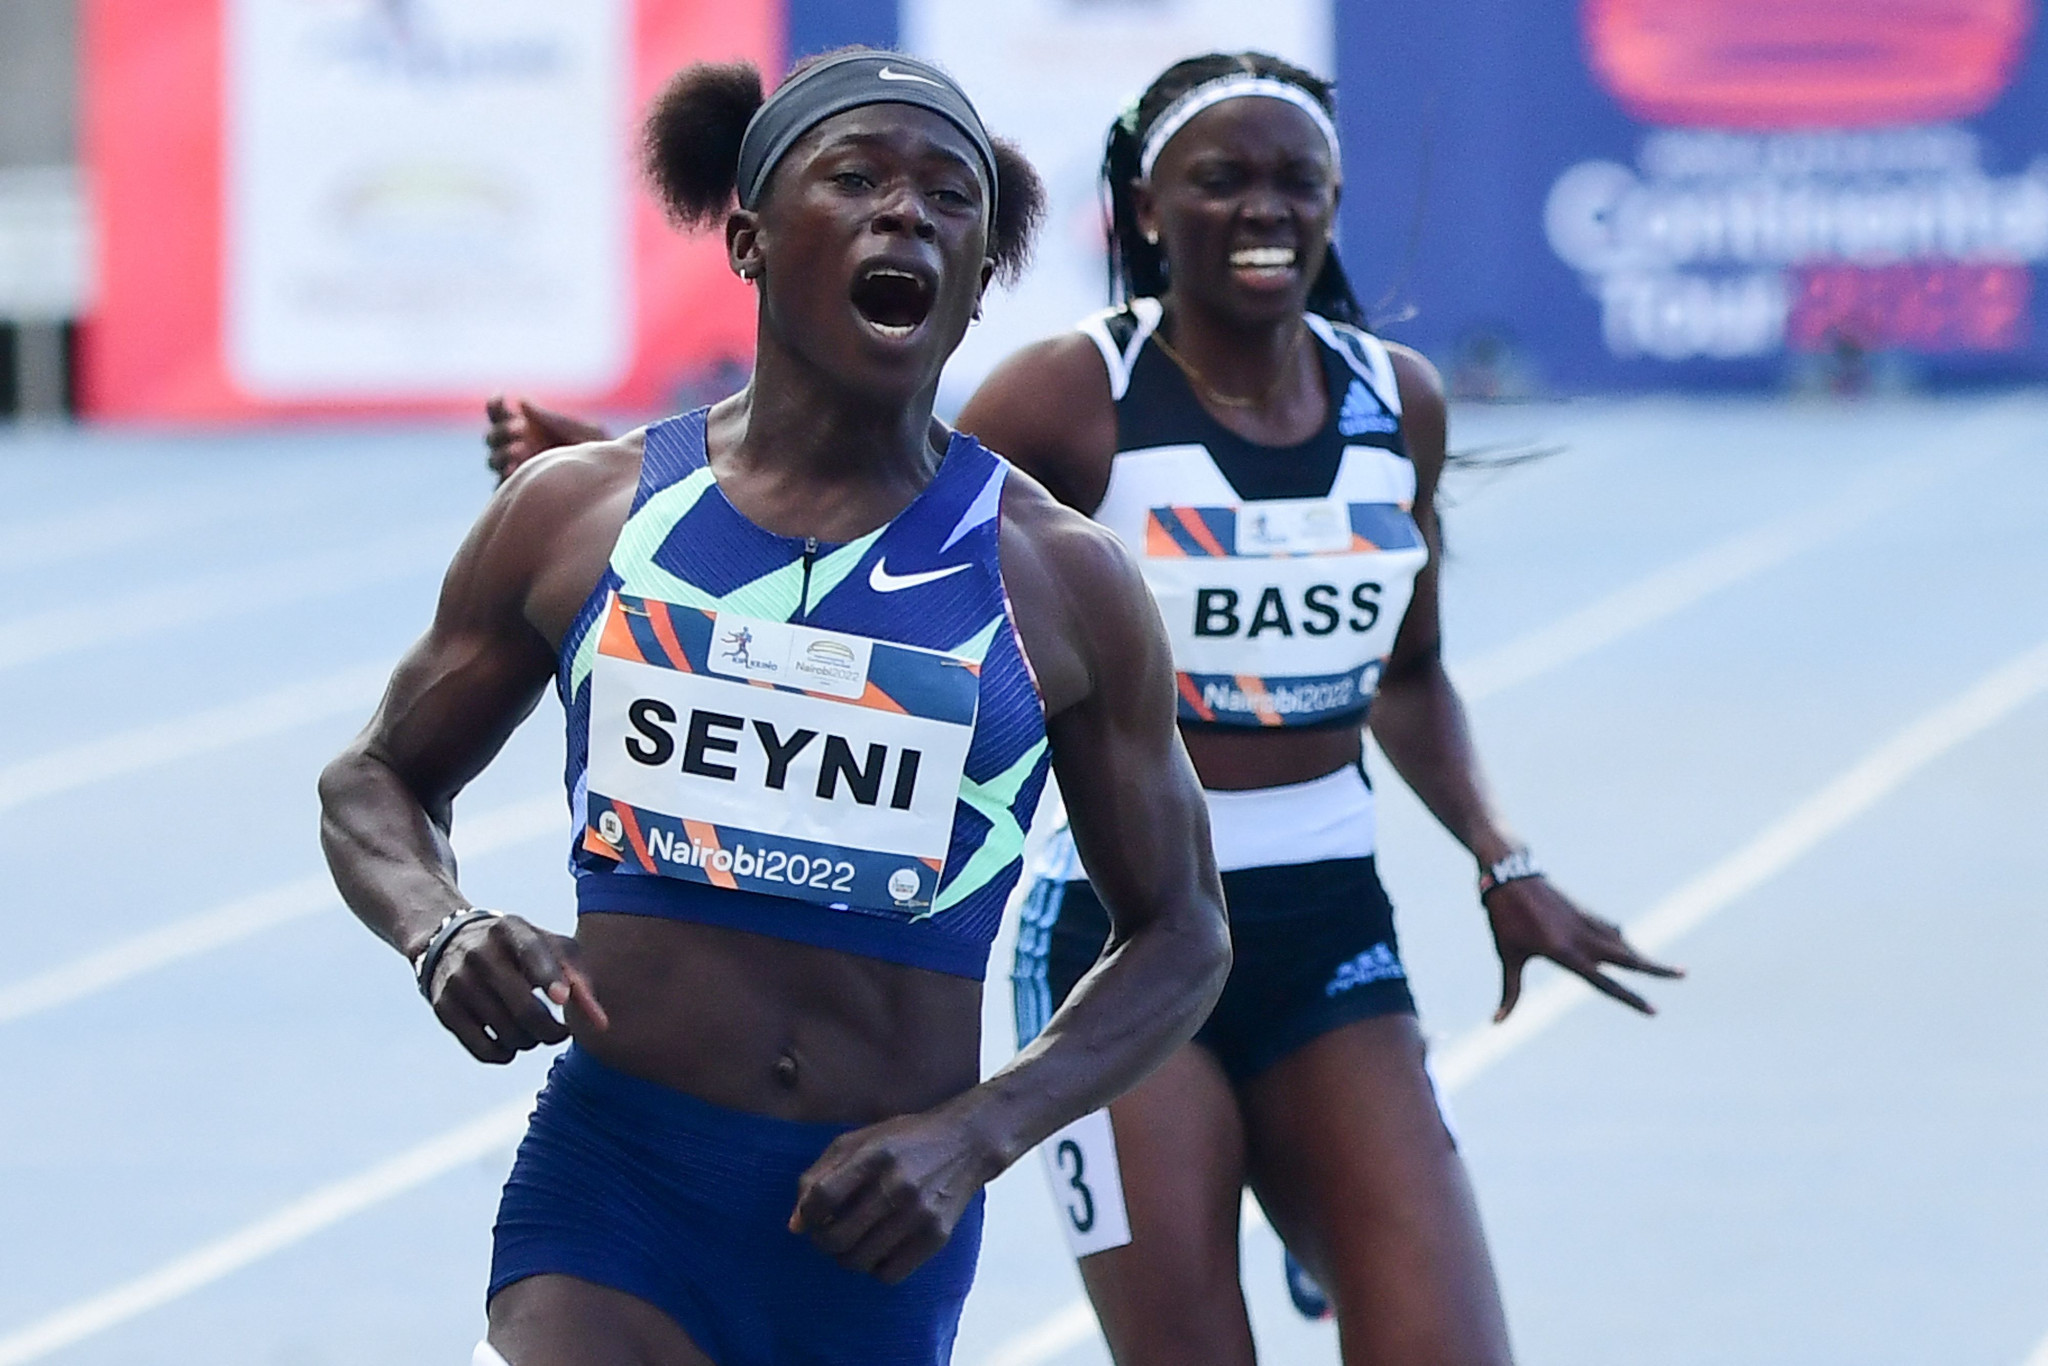 Aminatou Seyni and Gina Bass are into the women's 100m final ©Getty Images